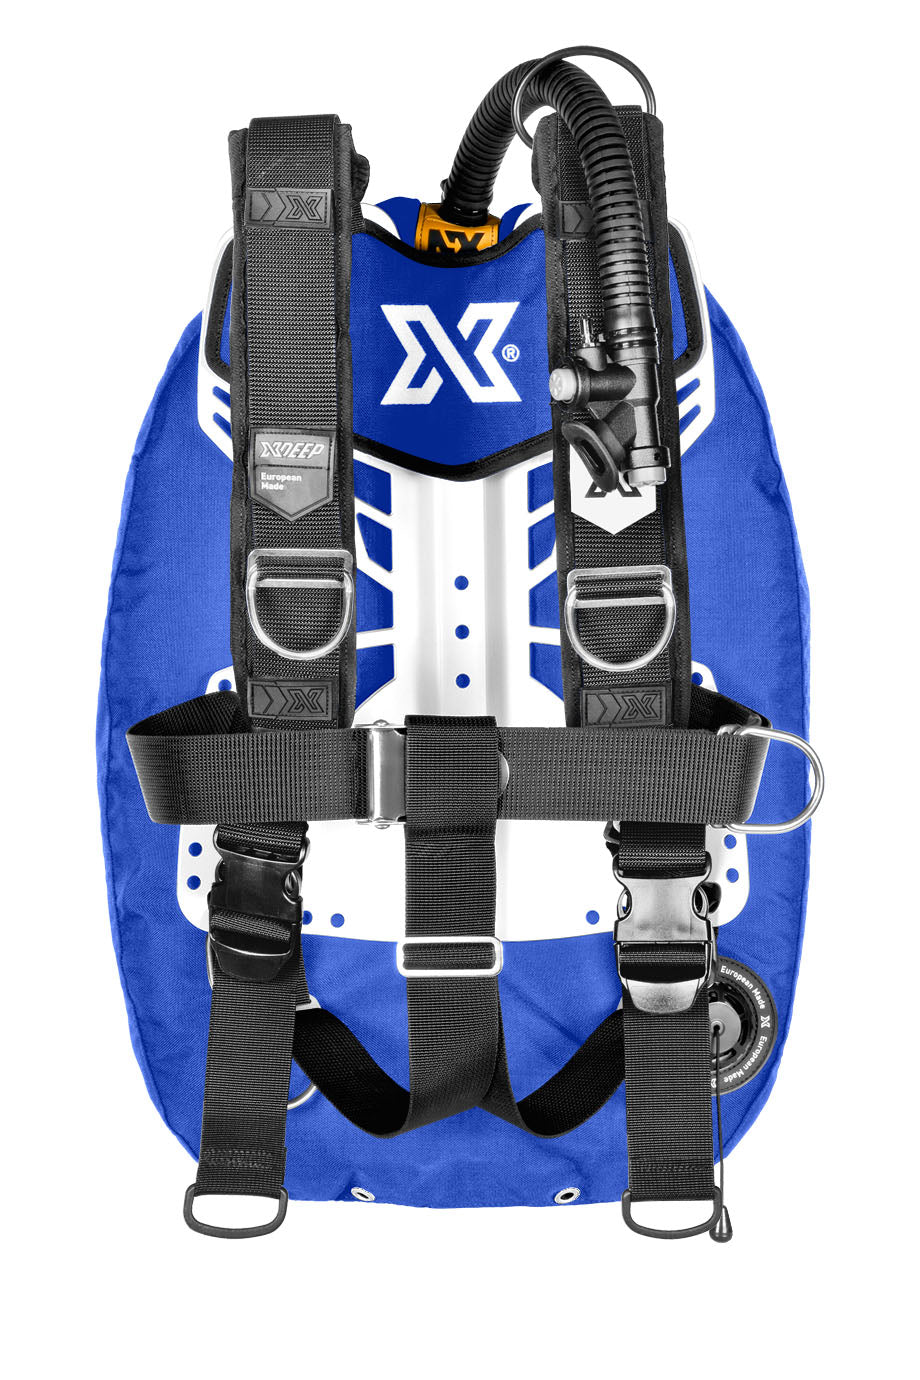 XDEEP XDEEP Zen Ultralight Wing System Deluxe / Small / Blue - Oyster Diving